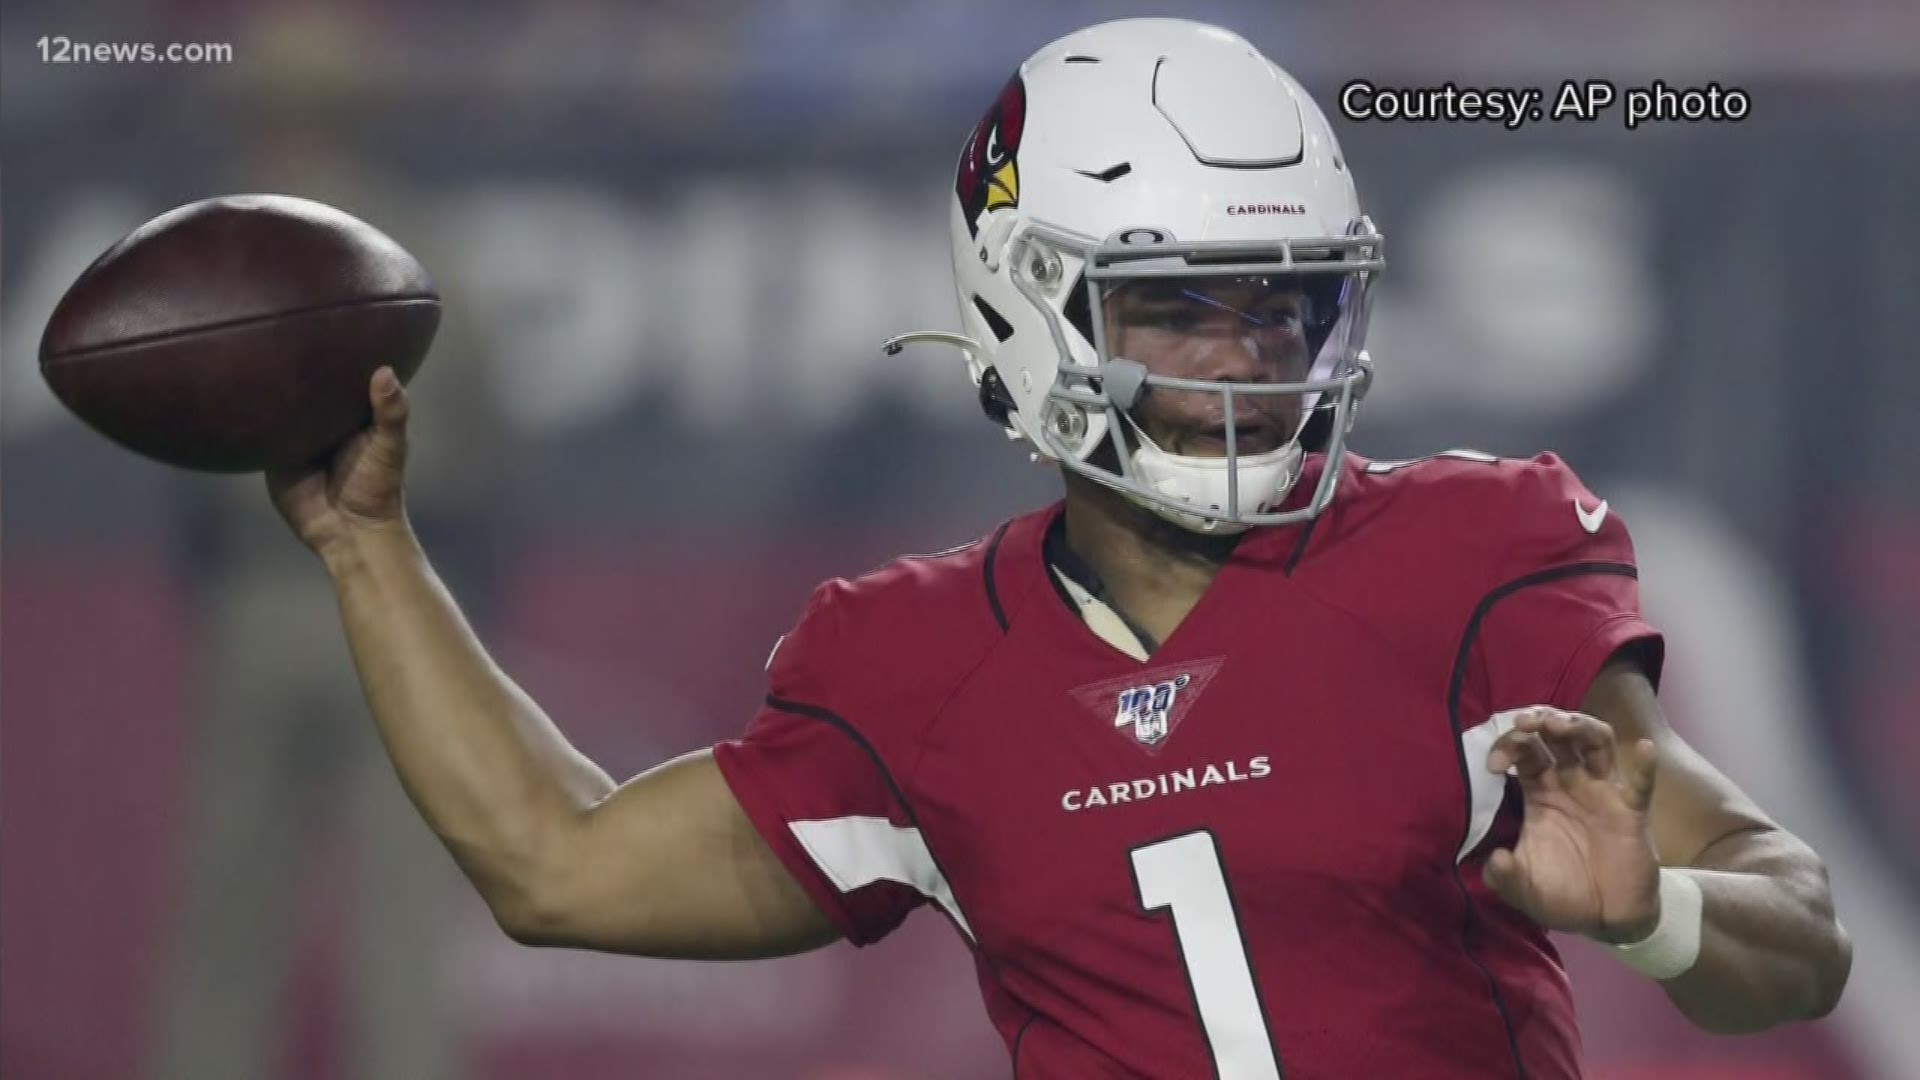 The Arizona Cardinals are 1-0 in the 2019 preseason and Kyler Murray was nearly perfect in his one drive as they beat the Los Angeles Chargers 17-13 at State Farm Stadium Thursday night.